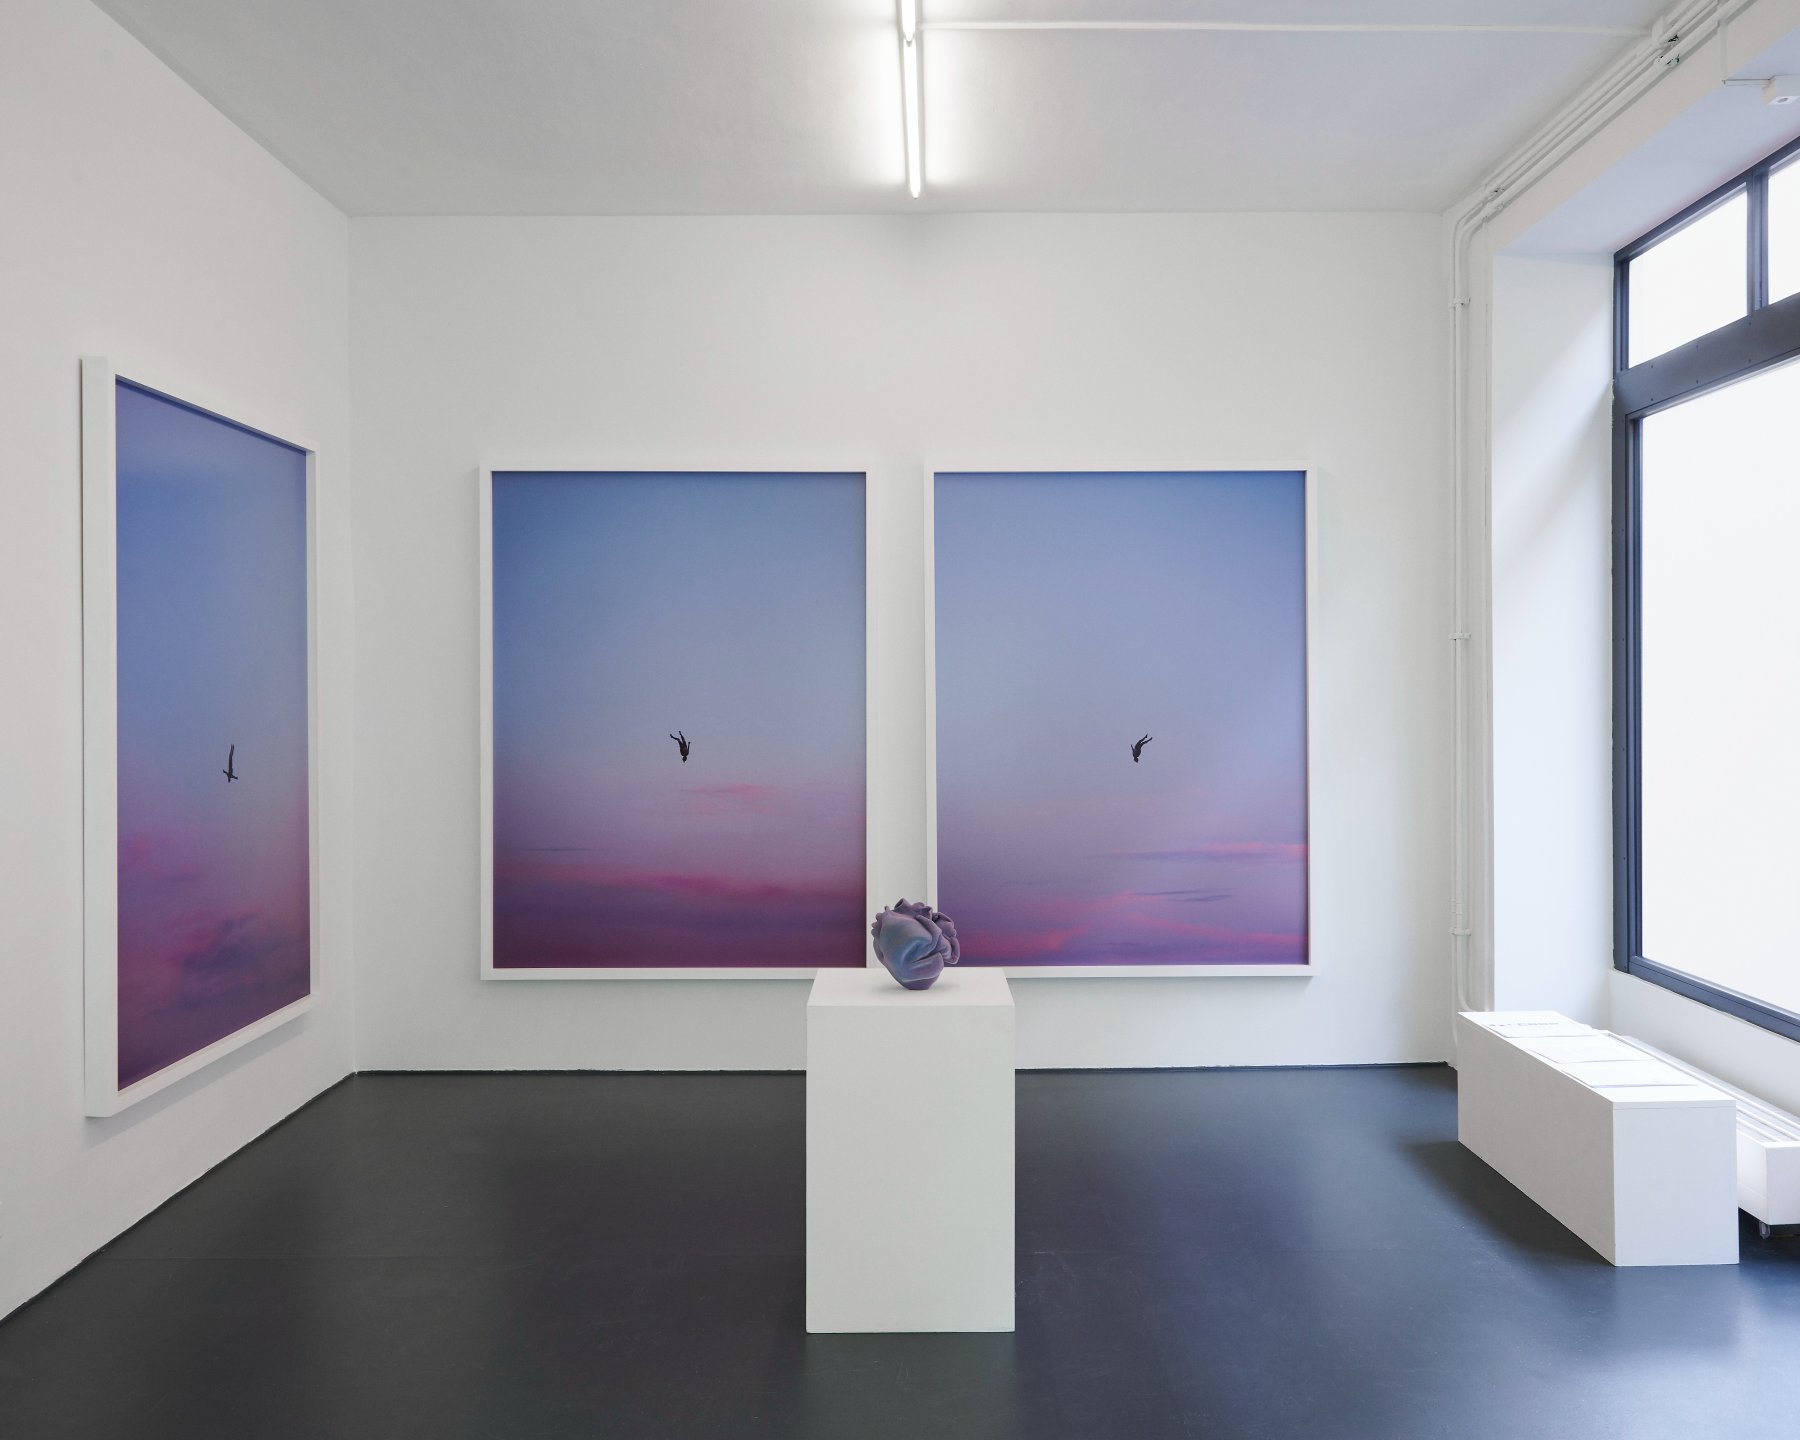 Installation image for Transformative Boundaries, at Fabienne Levy